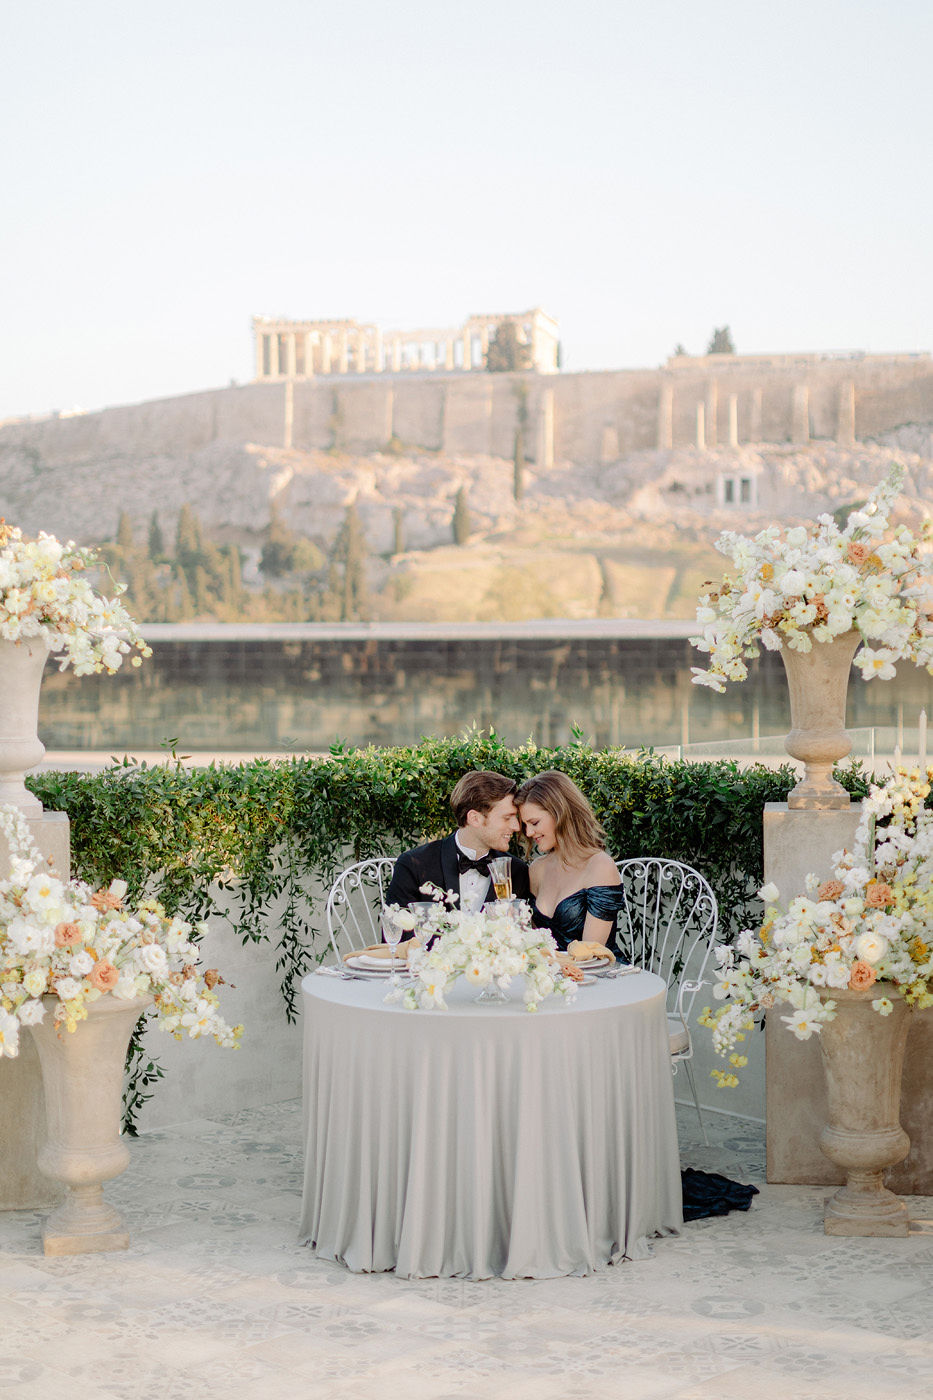 Wedding Proposal In Athens - Romantic Dinner